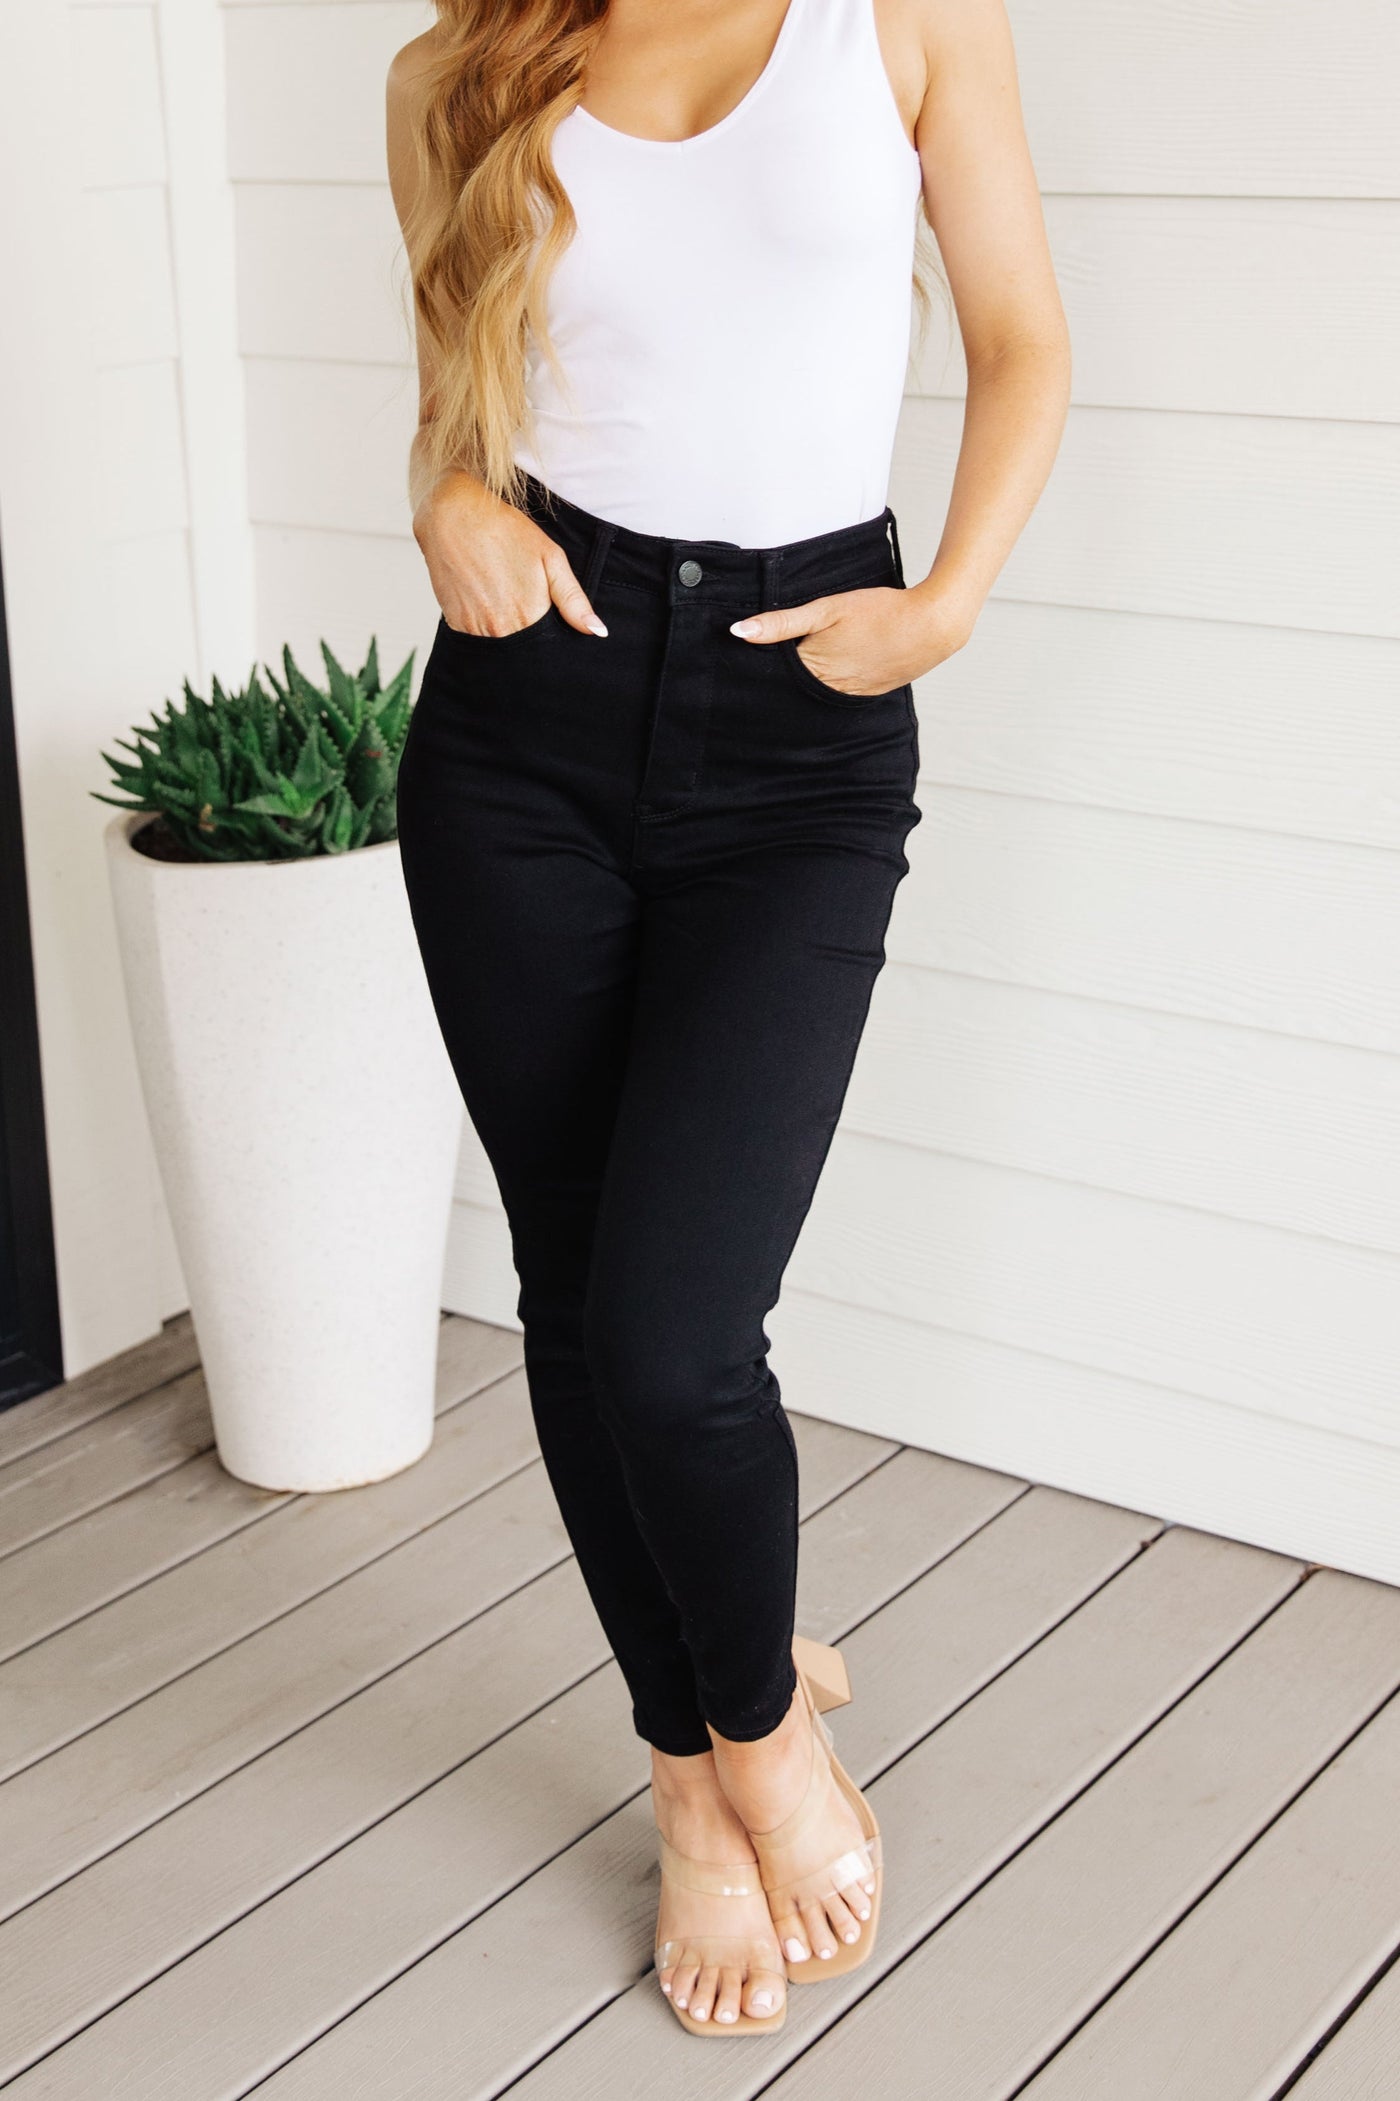 Judy Blue | Audrey Heps High Rise Control Top Classic Black Skinny Jeans